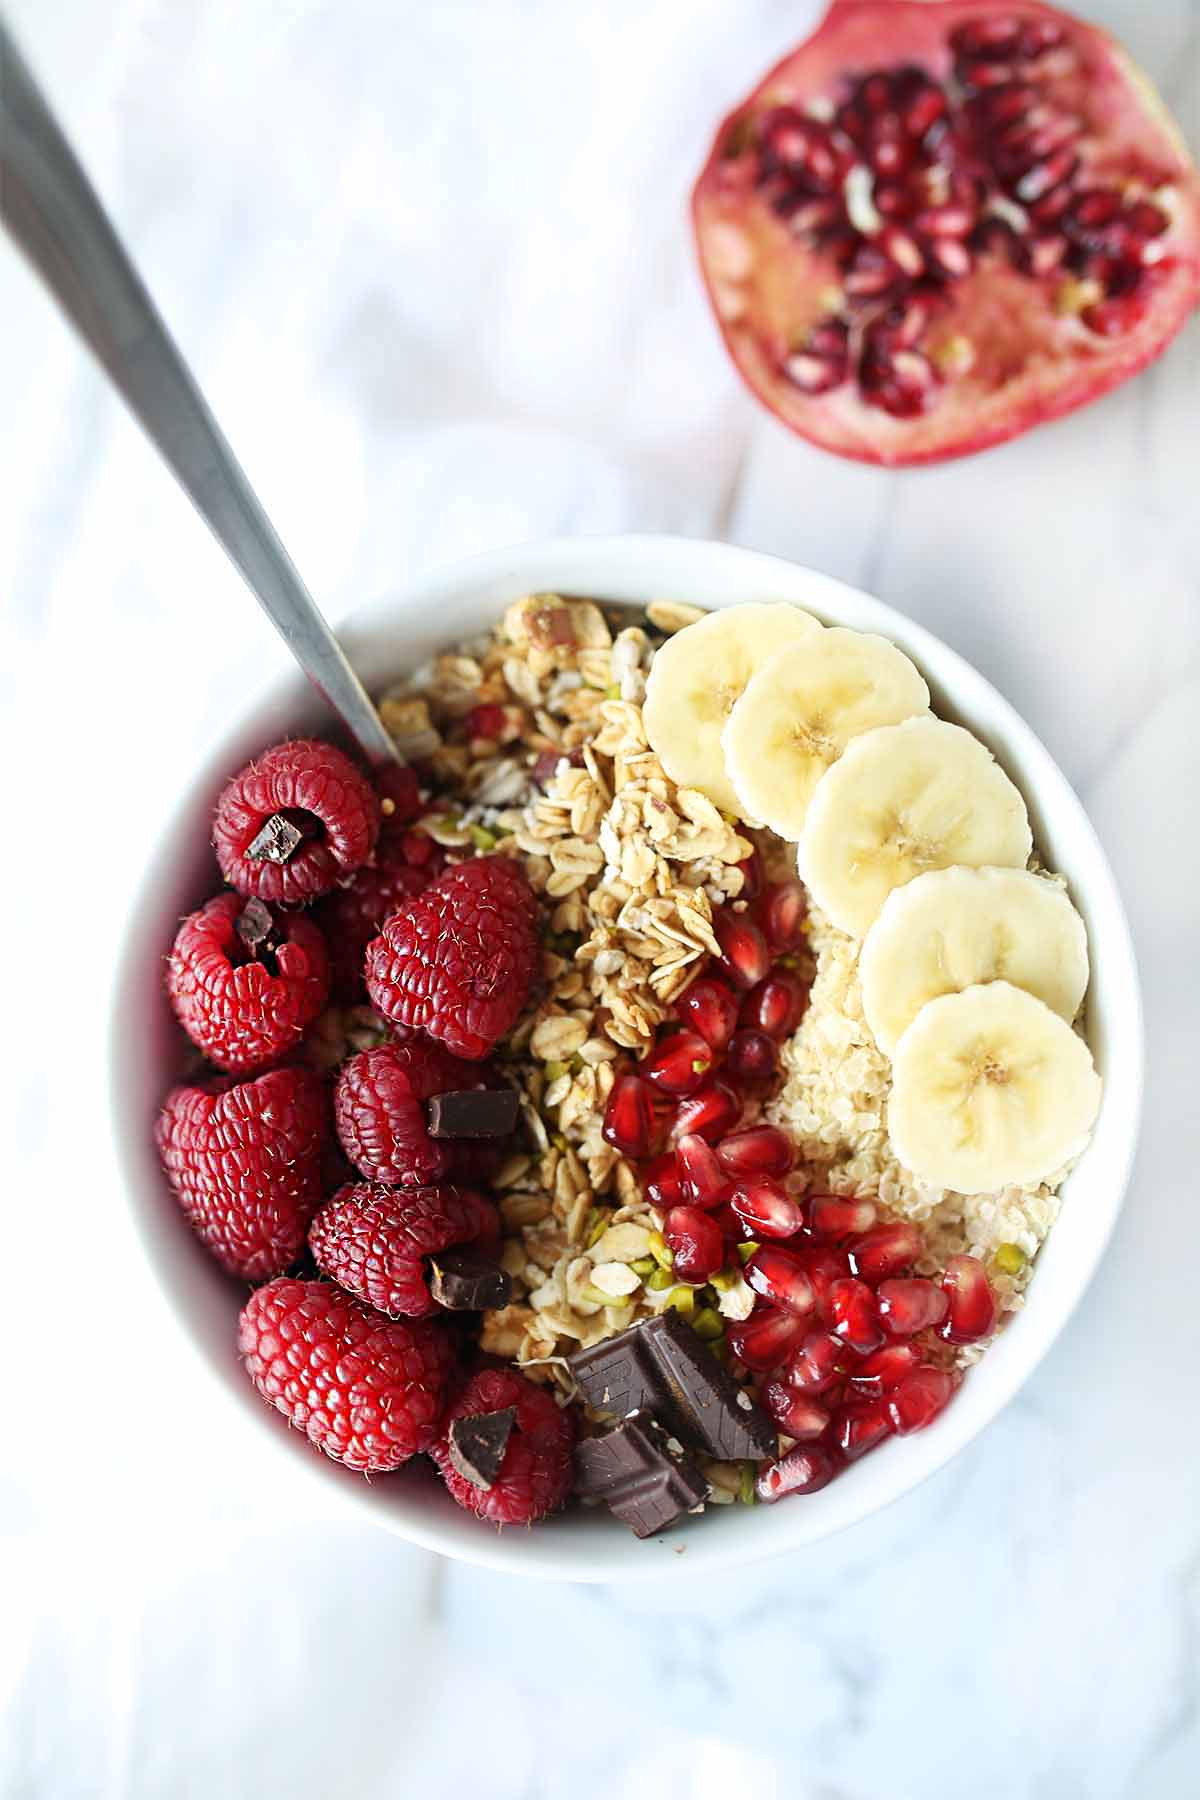 Plant Based Diet Breakfast Ideas
 Overnight oatmeal with 20g of plant based protein